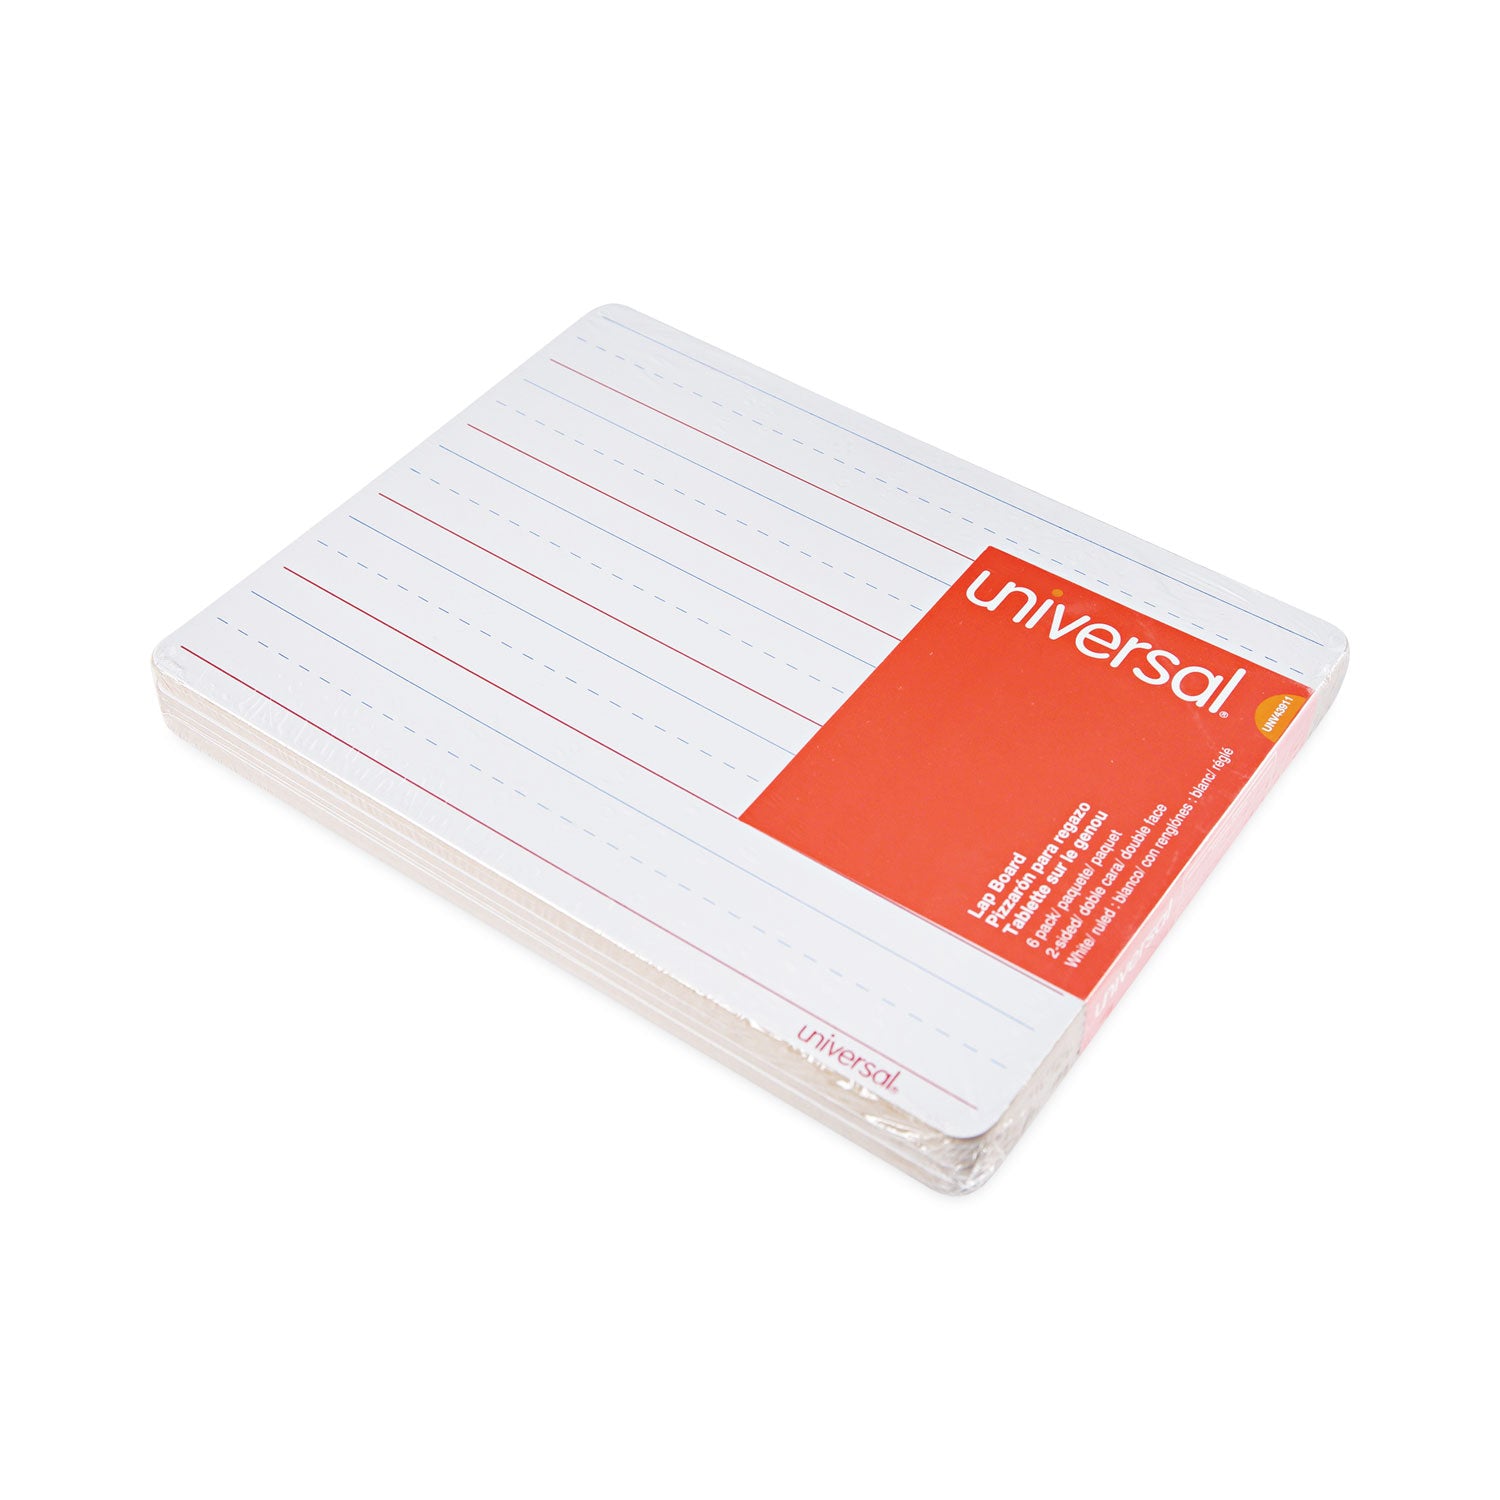 lap-learning-dry-erase-board-penmanship-ruled-1175-x-875-white-surface-6-pack_unv43911 - 2